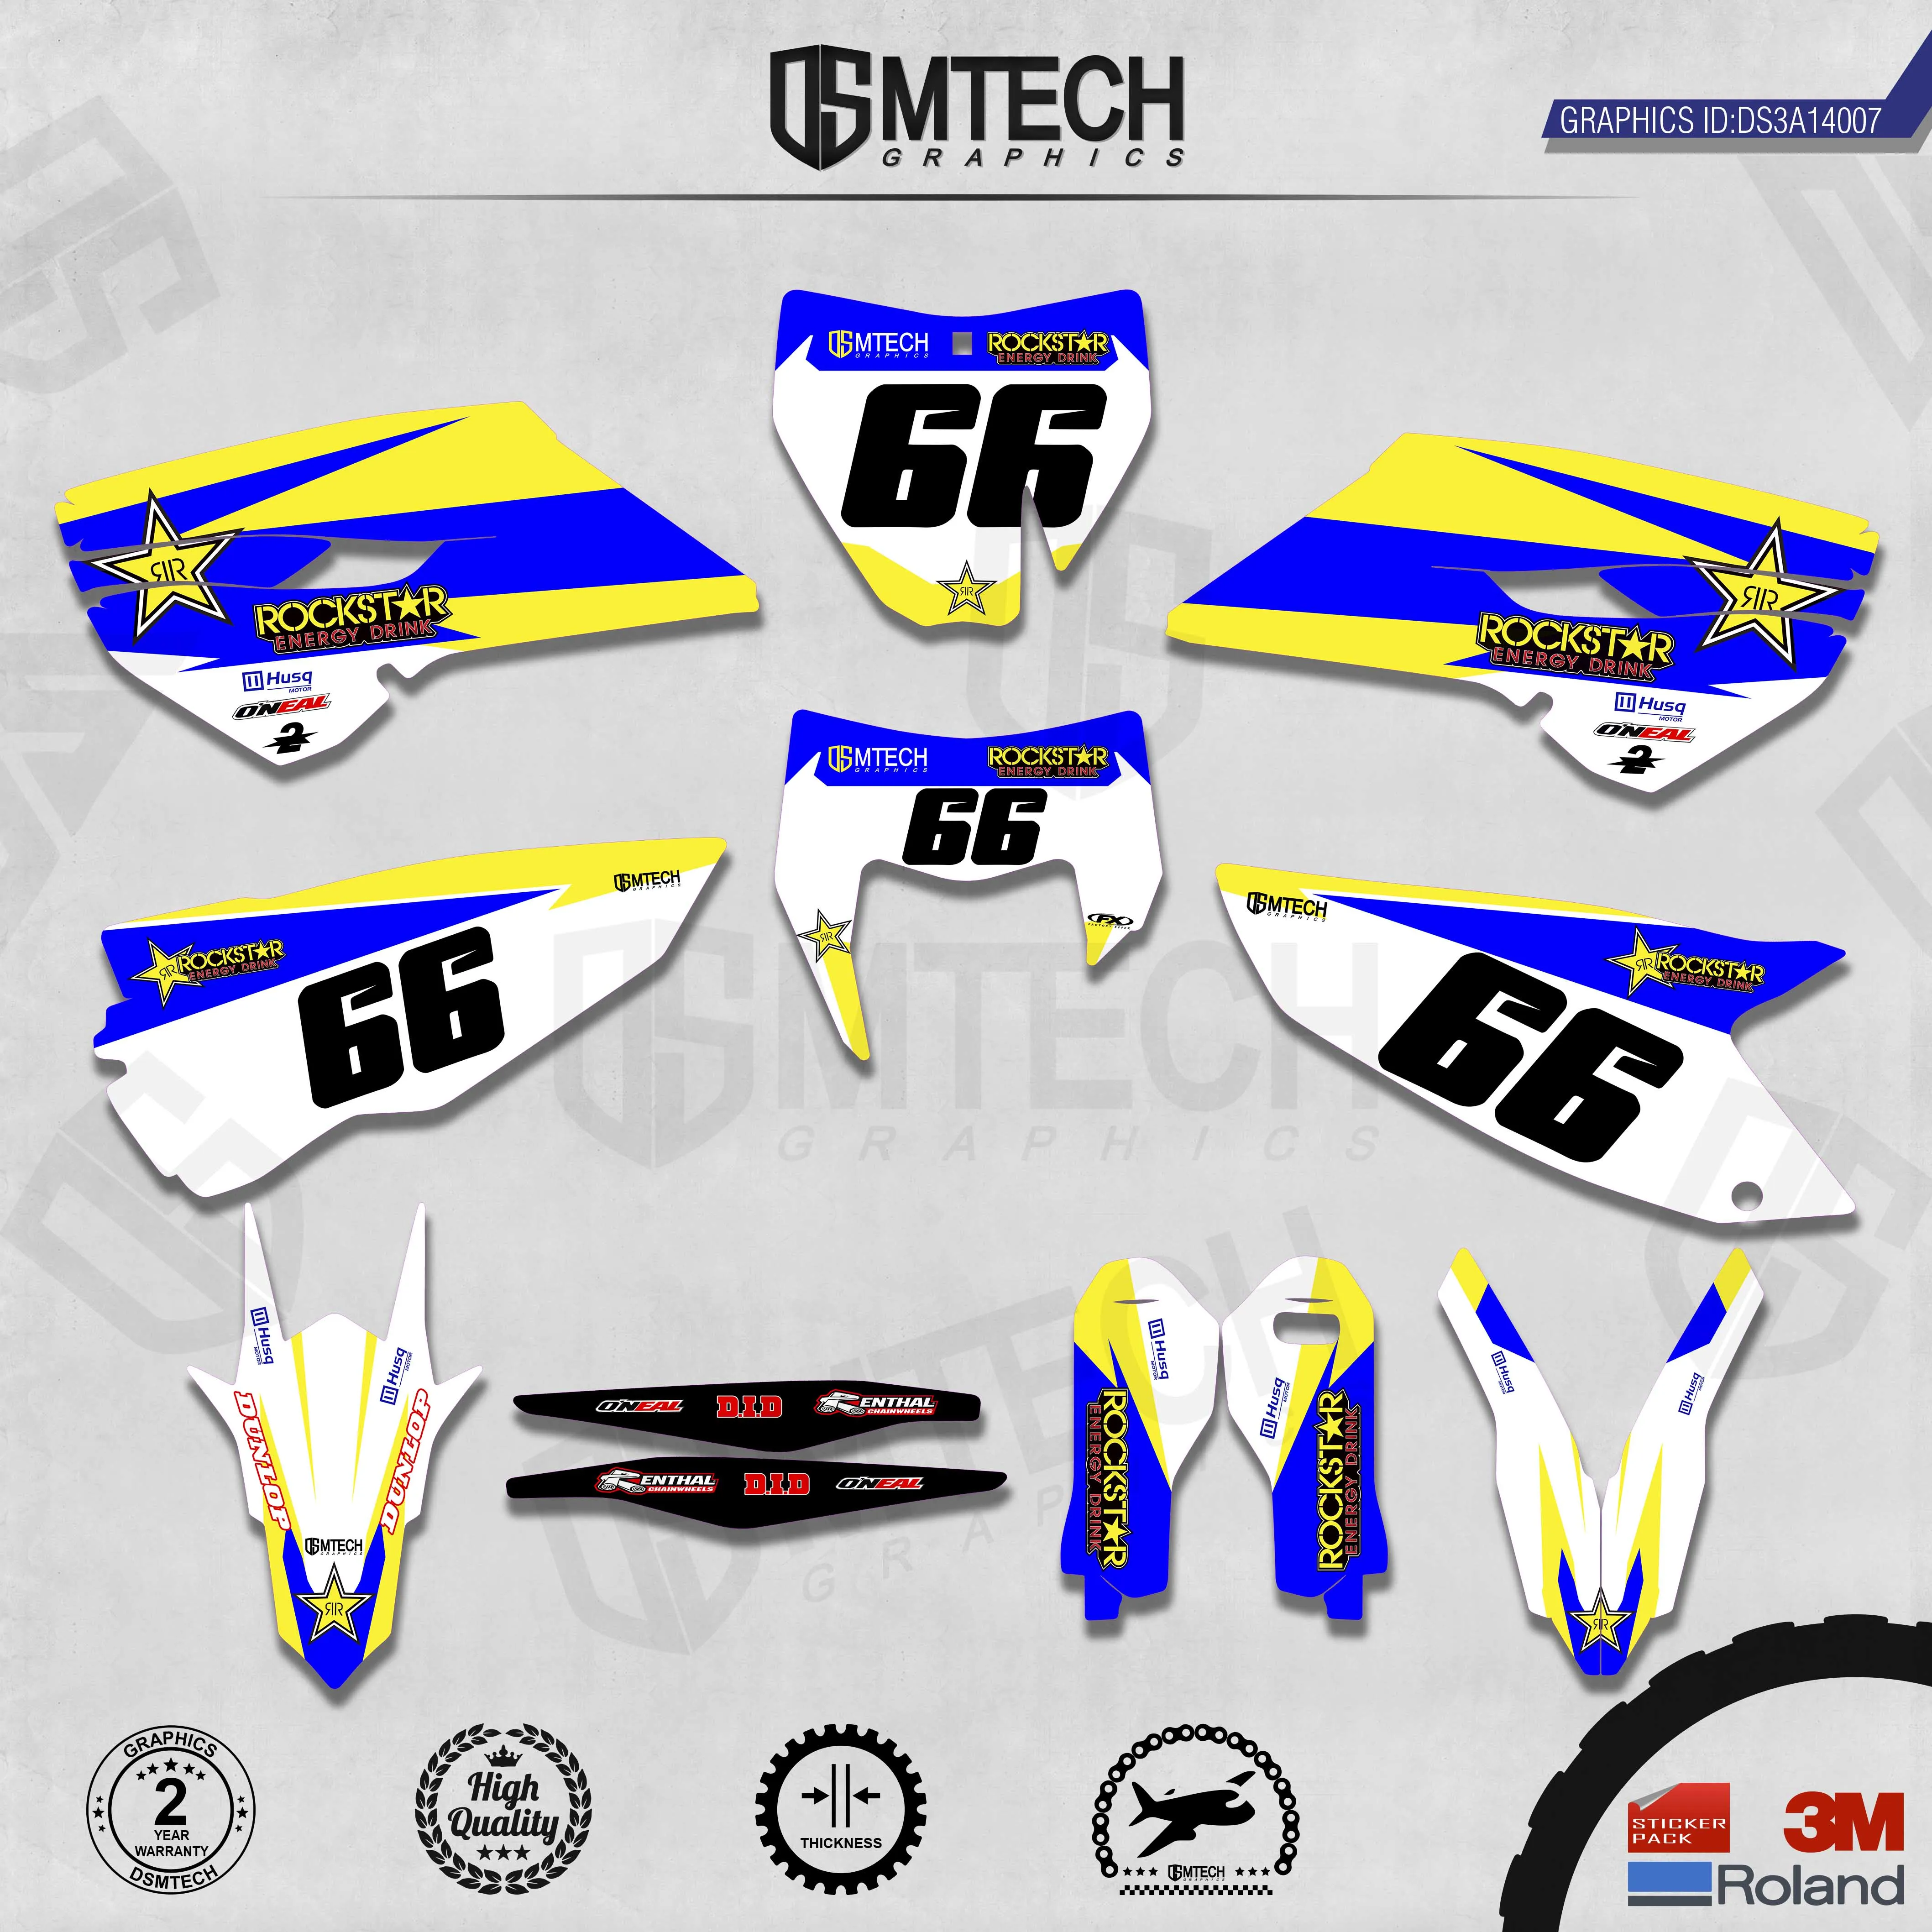 DSMTECH Customized Team Graphics Backgrounds Decals 3M Custom Stickers For 2014-2015TC-FC 2014-2016TE-FE 007